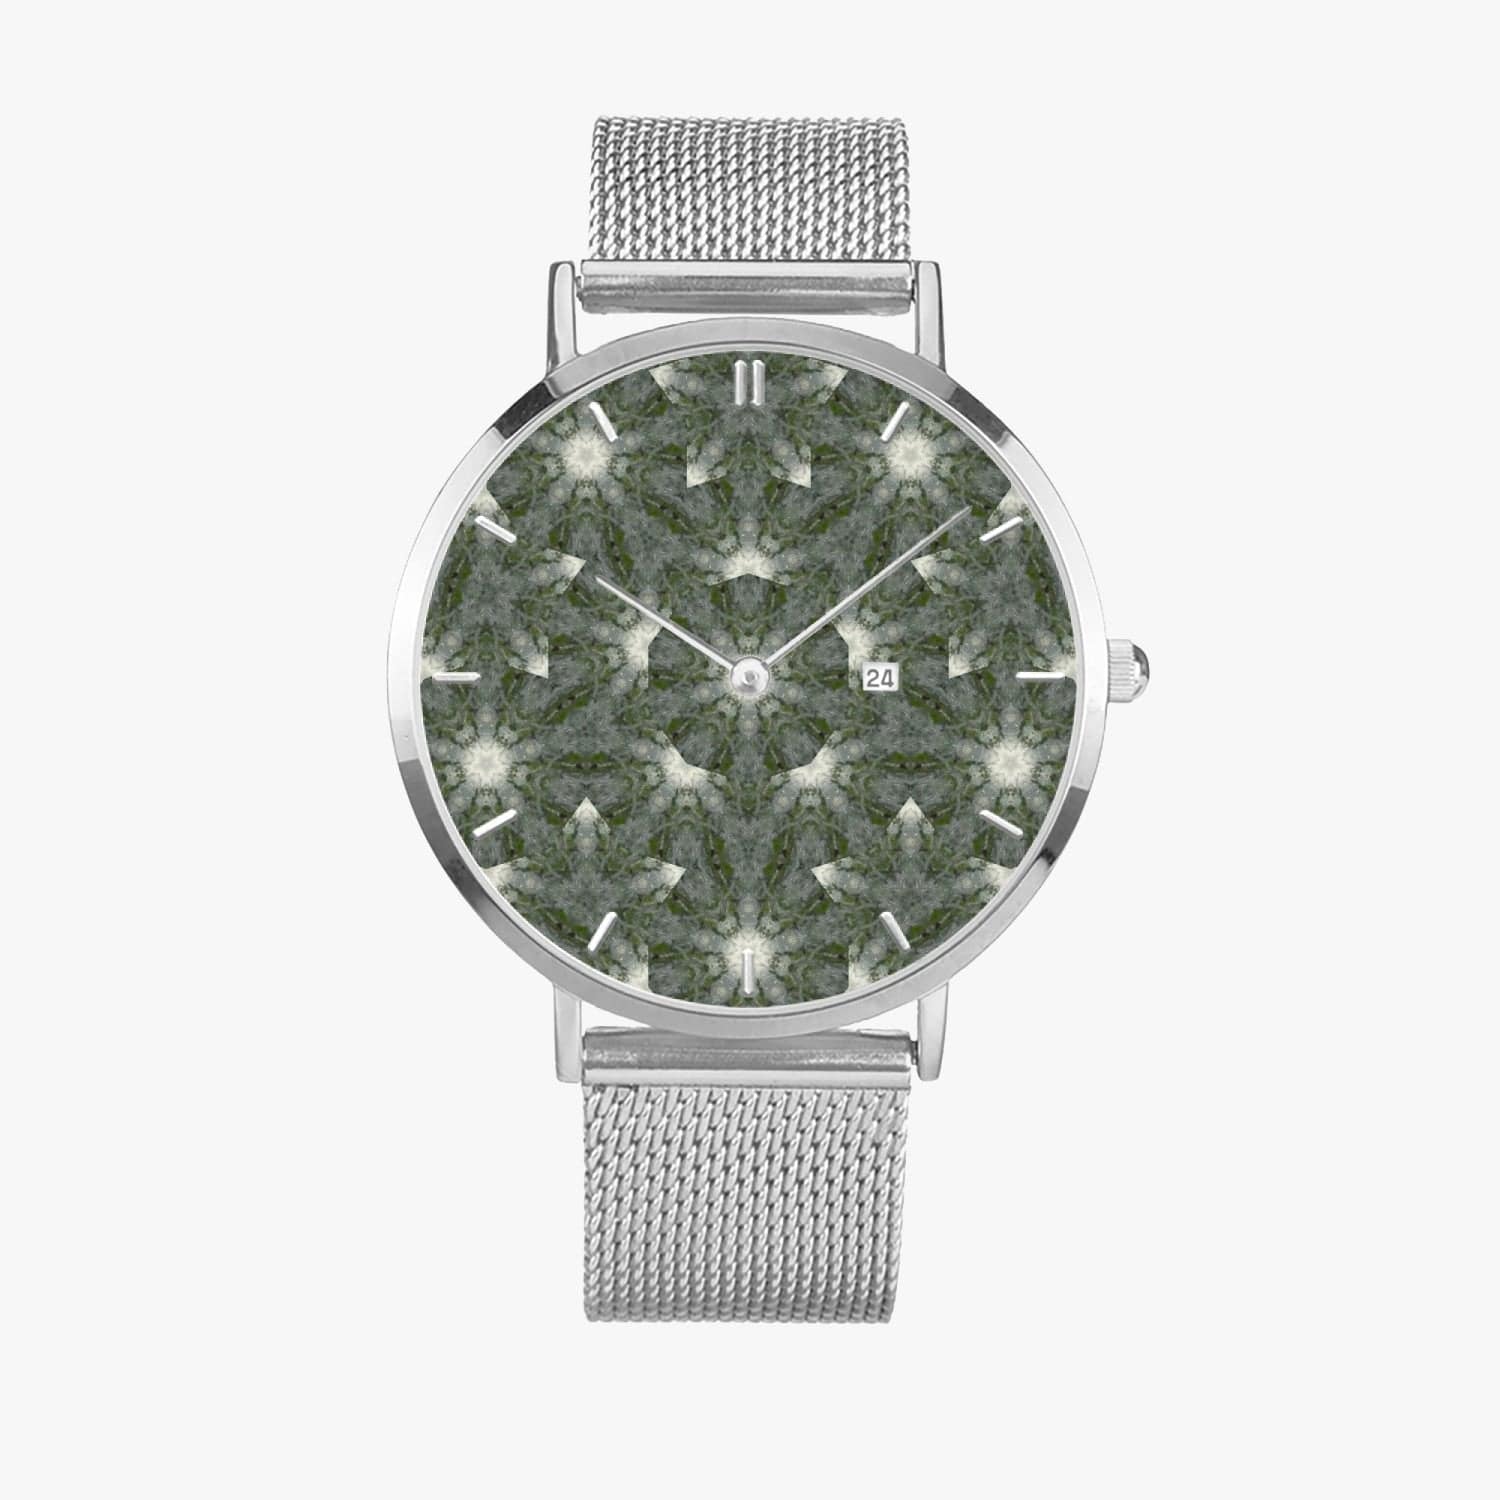 Morninglight in the forest, Stainless Steel Perpetual Calendar Quartz Watch (With Indicators)by Sensus Studio Design